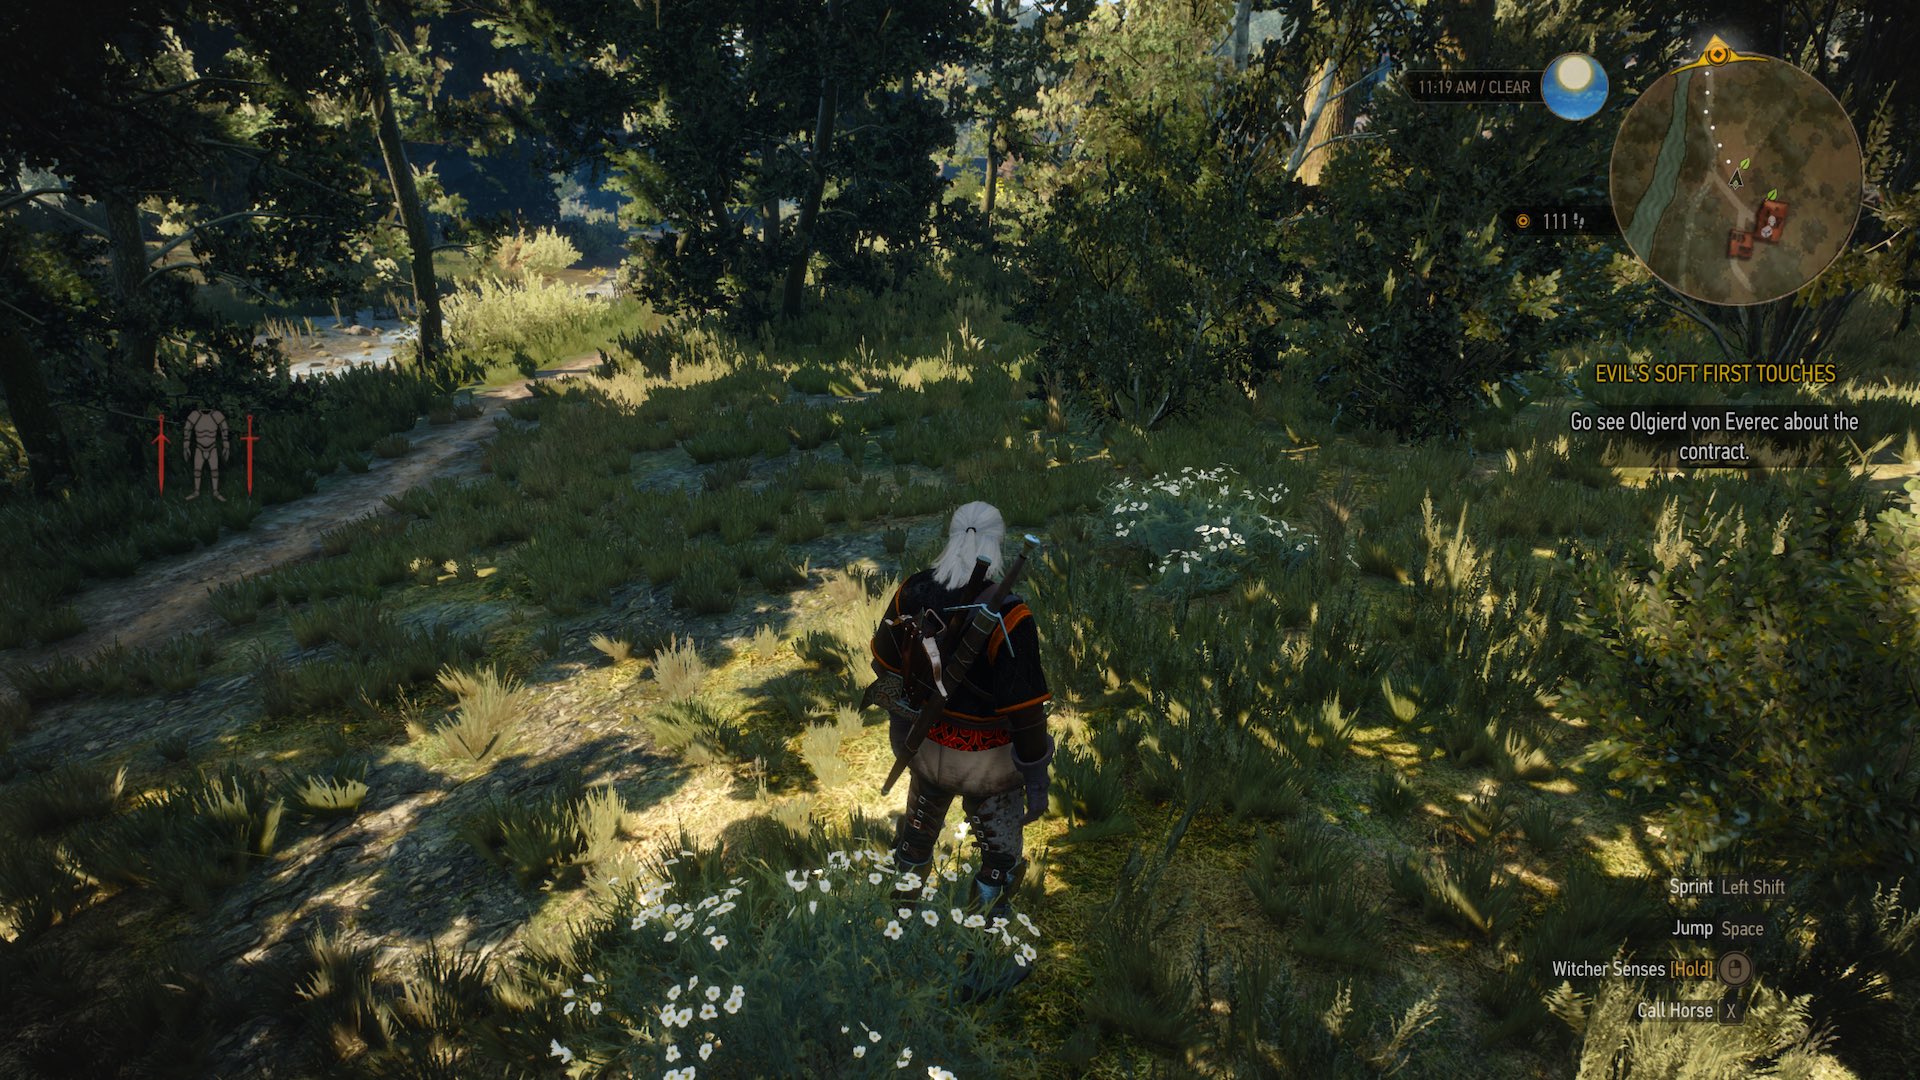 Witcher 3 Forest